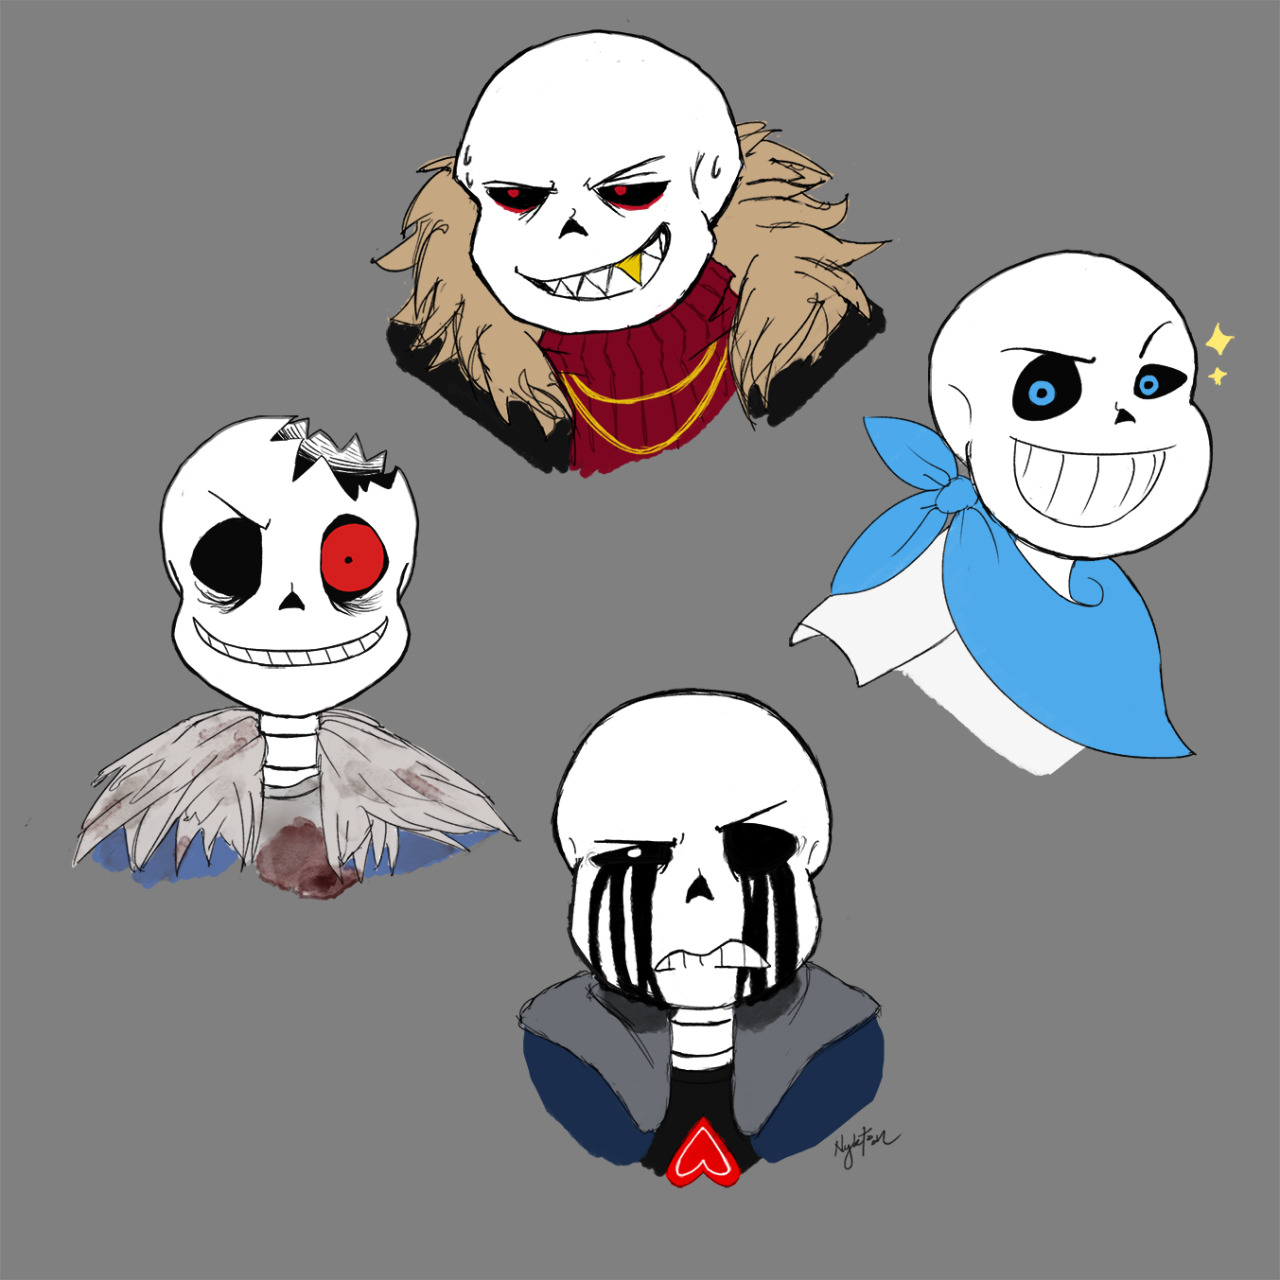 Wanted to try my hand at drawing some AU boys as inspired by their canon :3c (rather than specifically BHC versions). Obviously still took some creative liberties. I’m really happy with how they came out! #nyktooned #uf!sans  #us!sans  #killer!sans  #ht!sans #tw blood